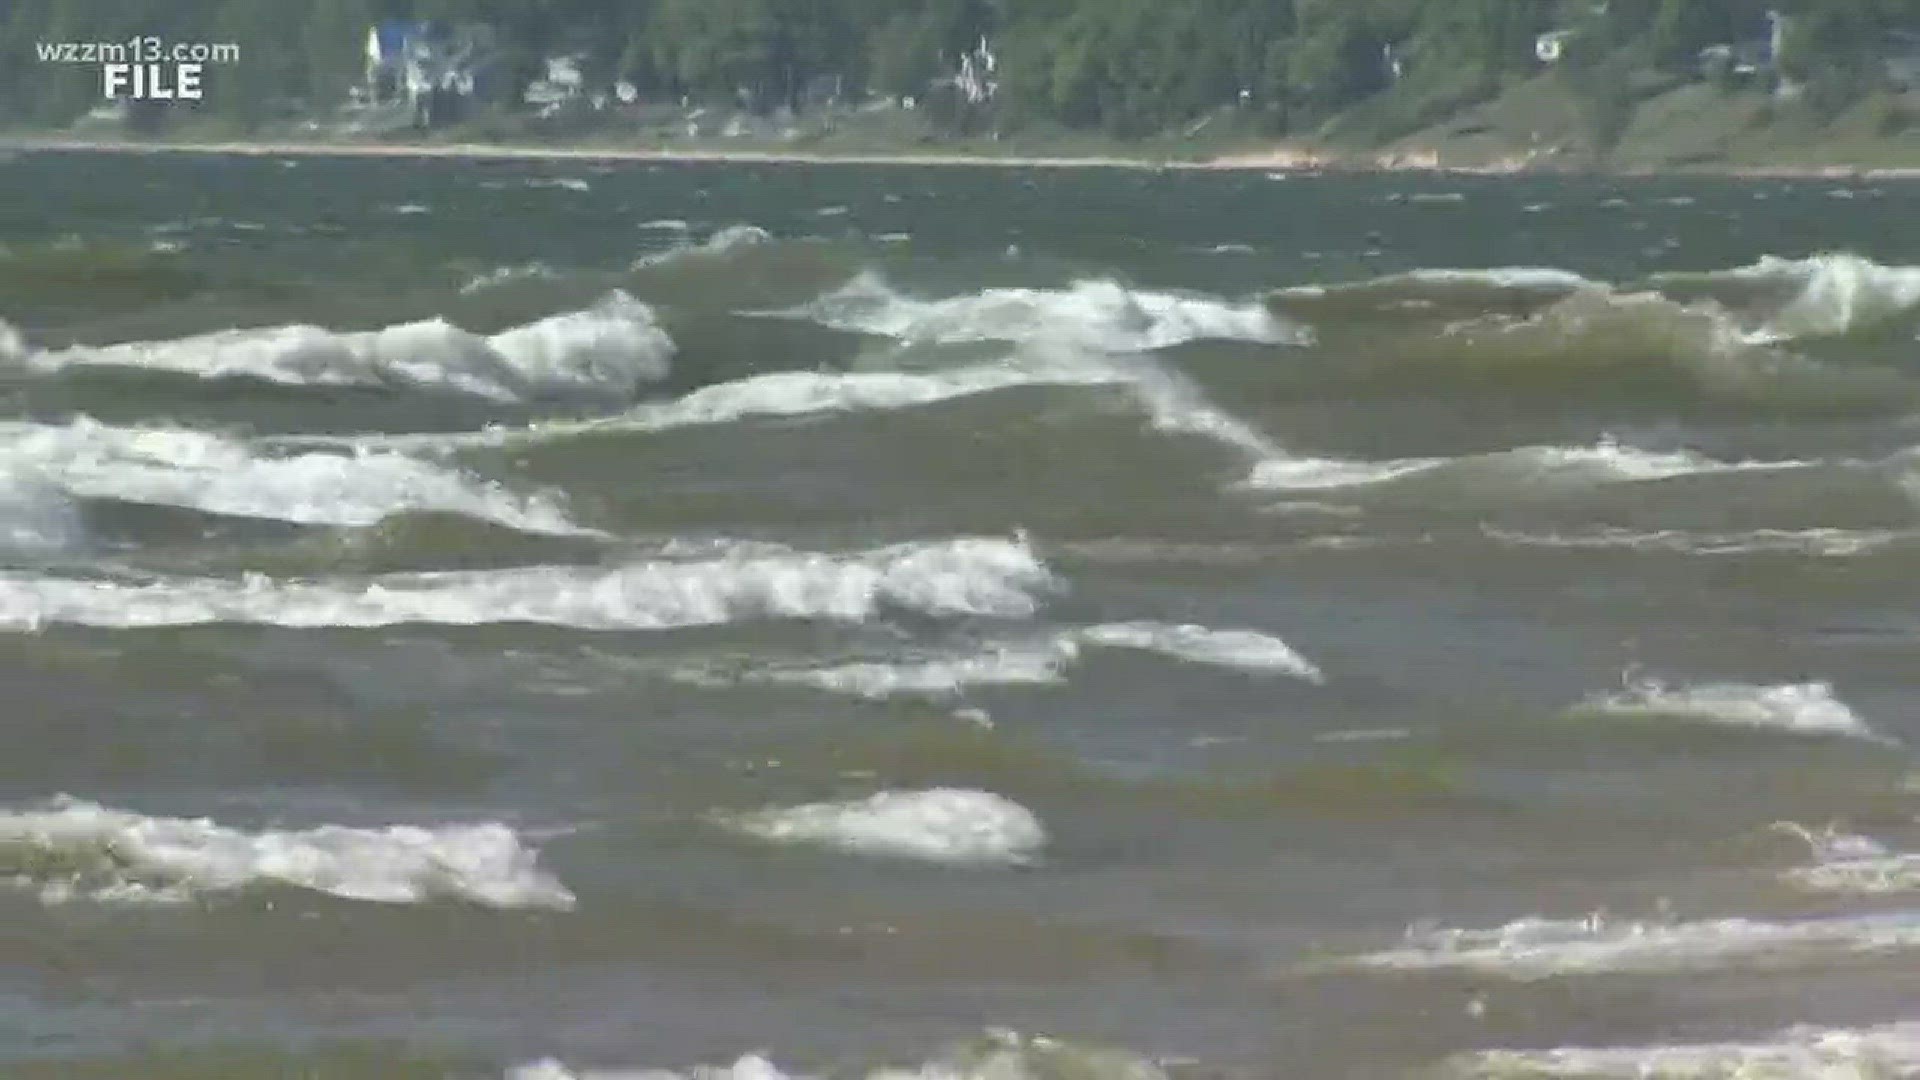 Tsunamis can occur on the Great Lakes